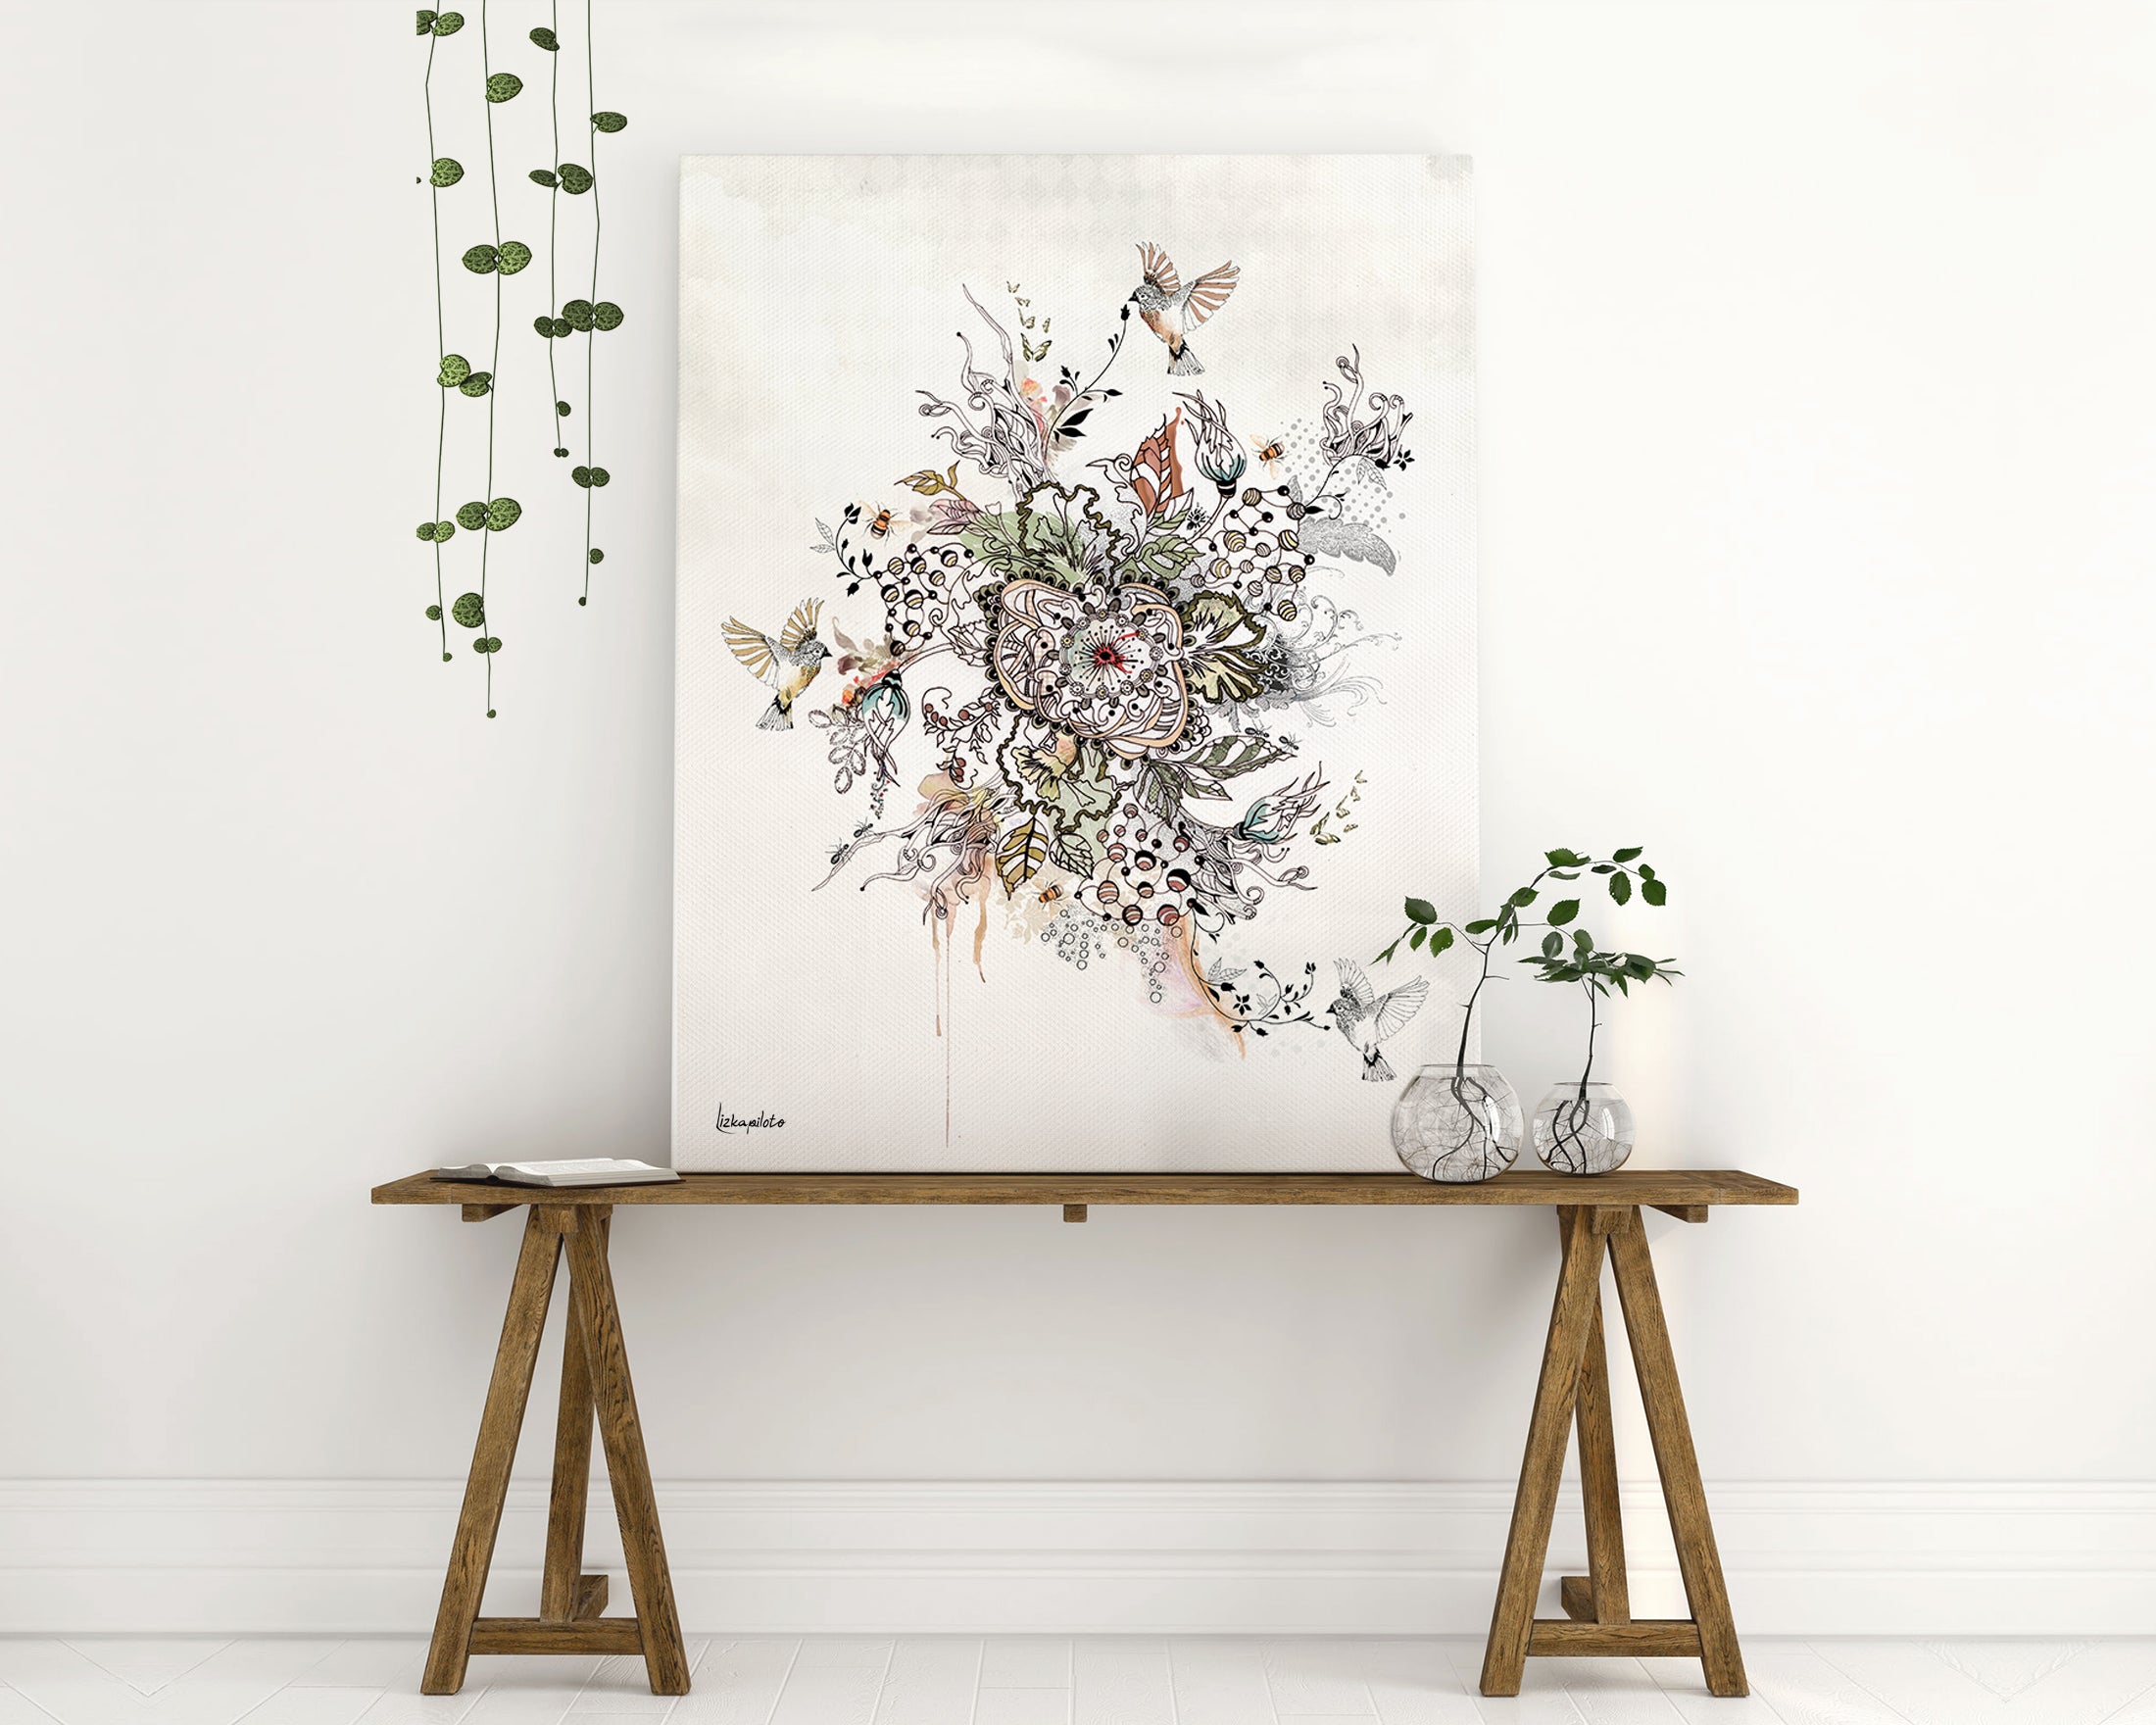 Black and white flowers and birds painting